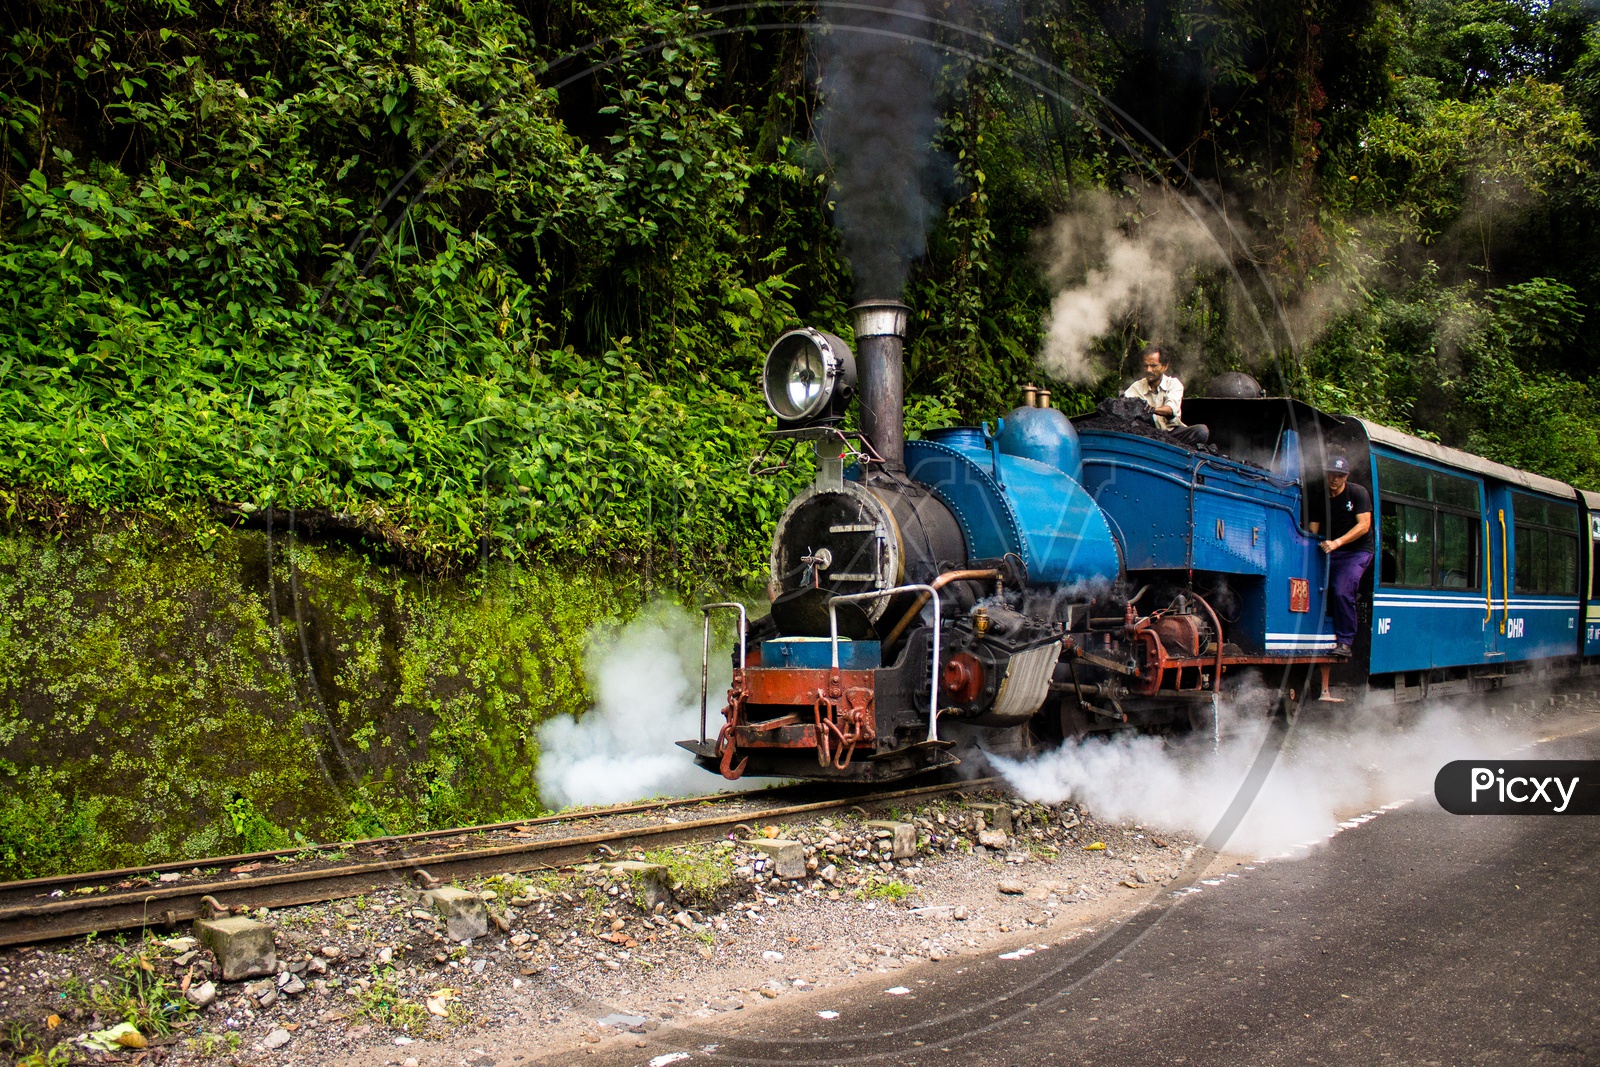 The Darjeeling Himalayan Railway, also known as the "Toy Train"